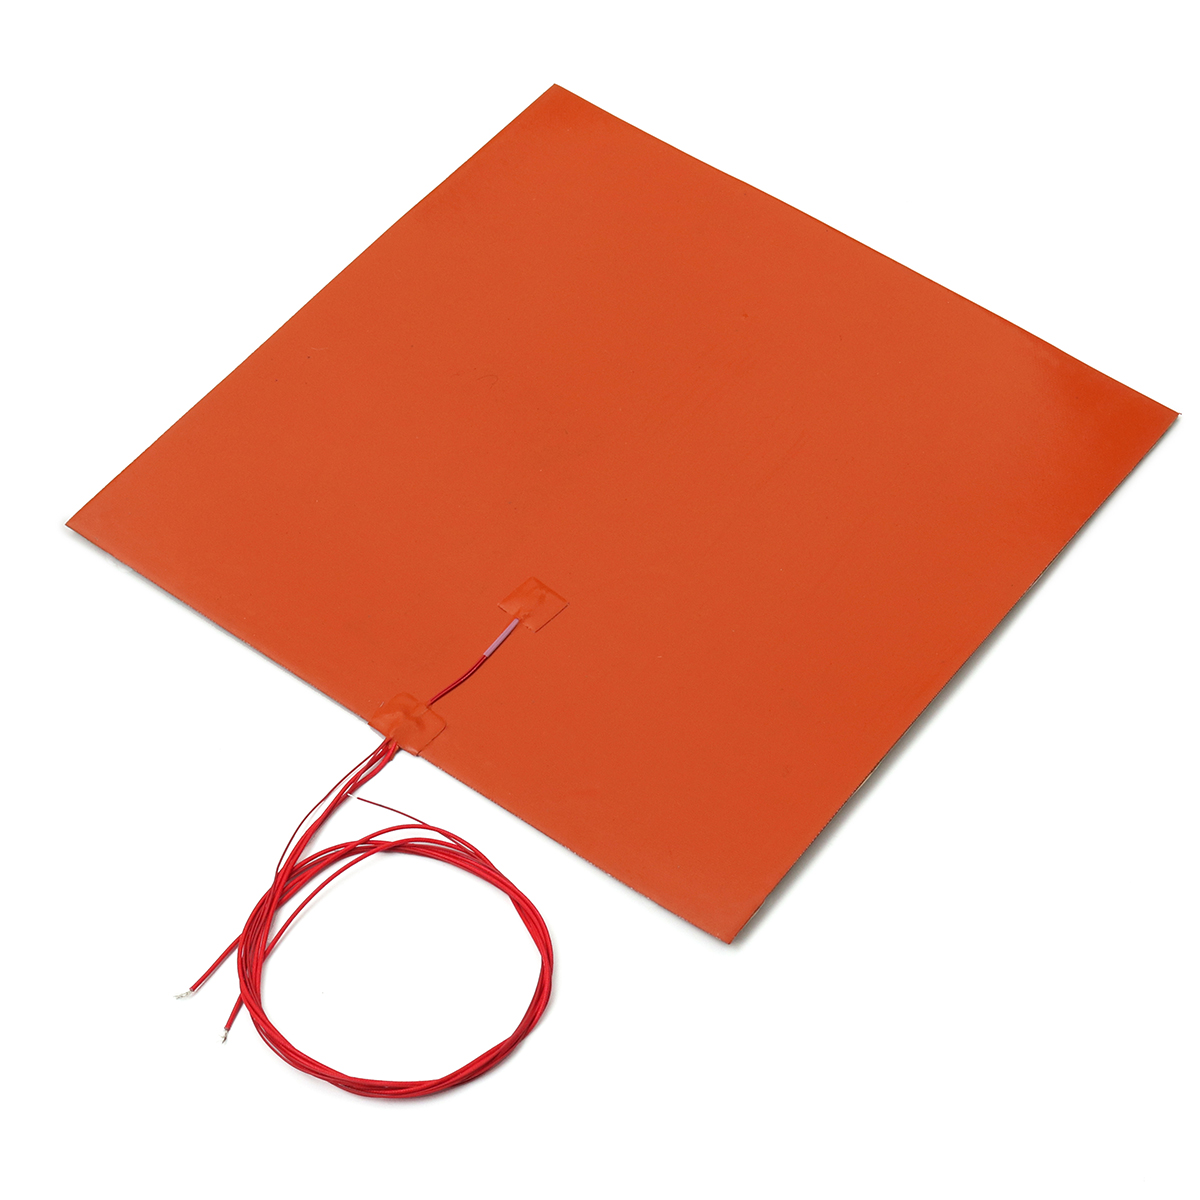 1400w 240V 400*400mm Silicone Heater Bed Pad For 3D Printer Without Hole 3